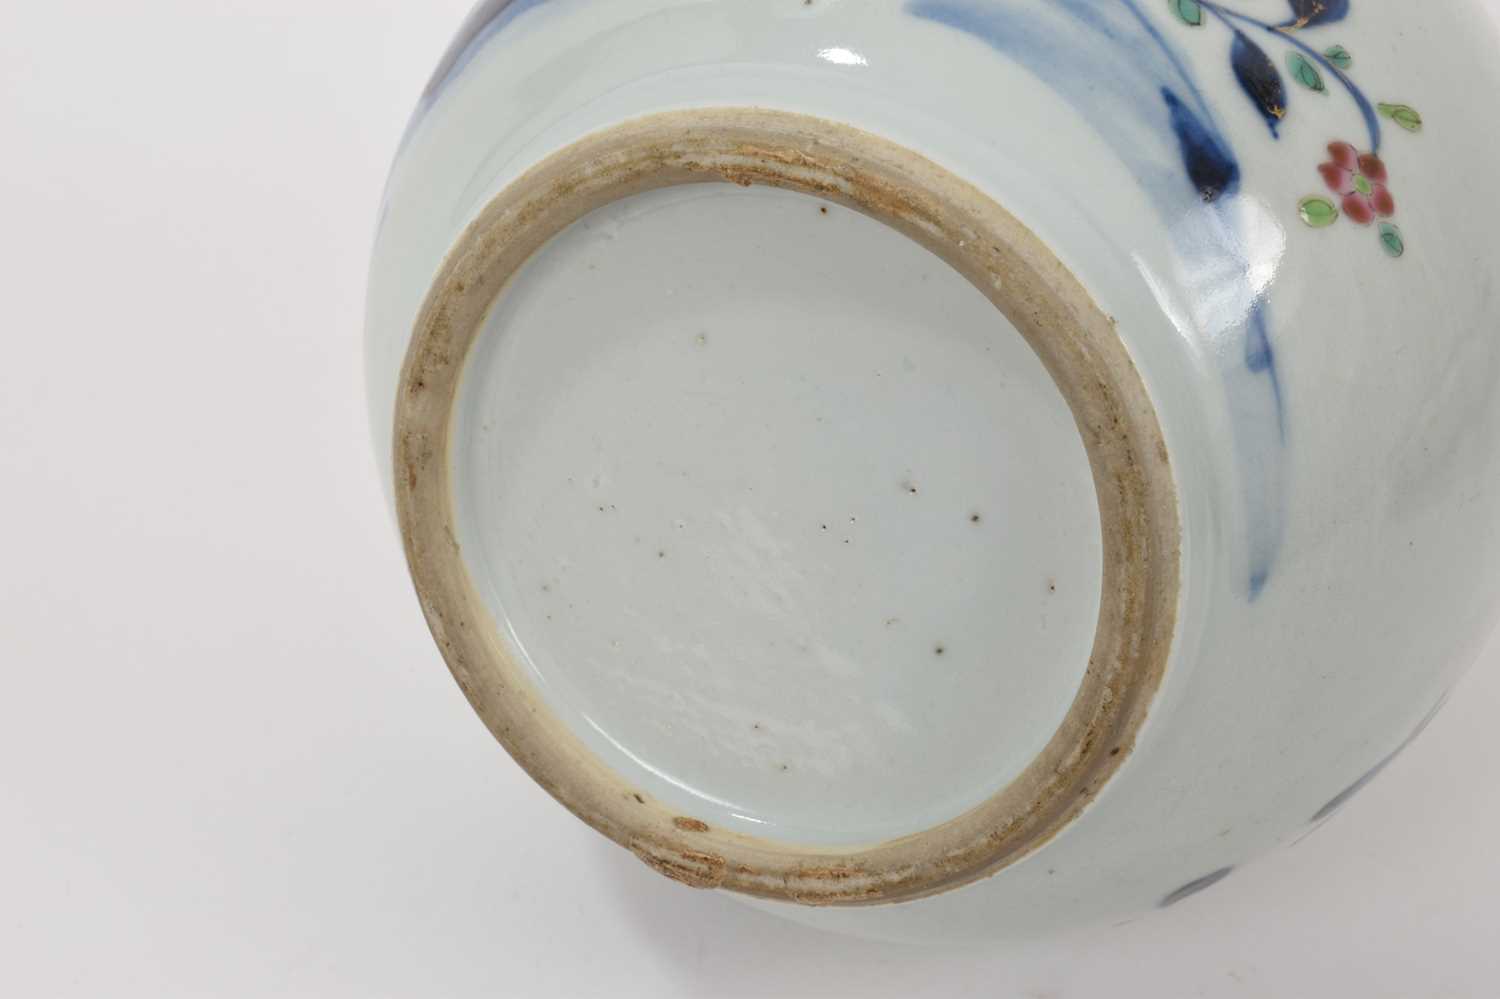 18th century Chinese porcelain guglet - Image 4 of 4